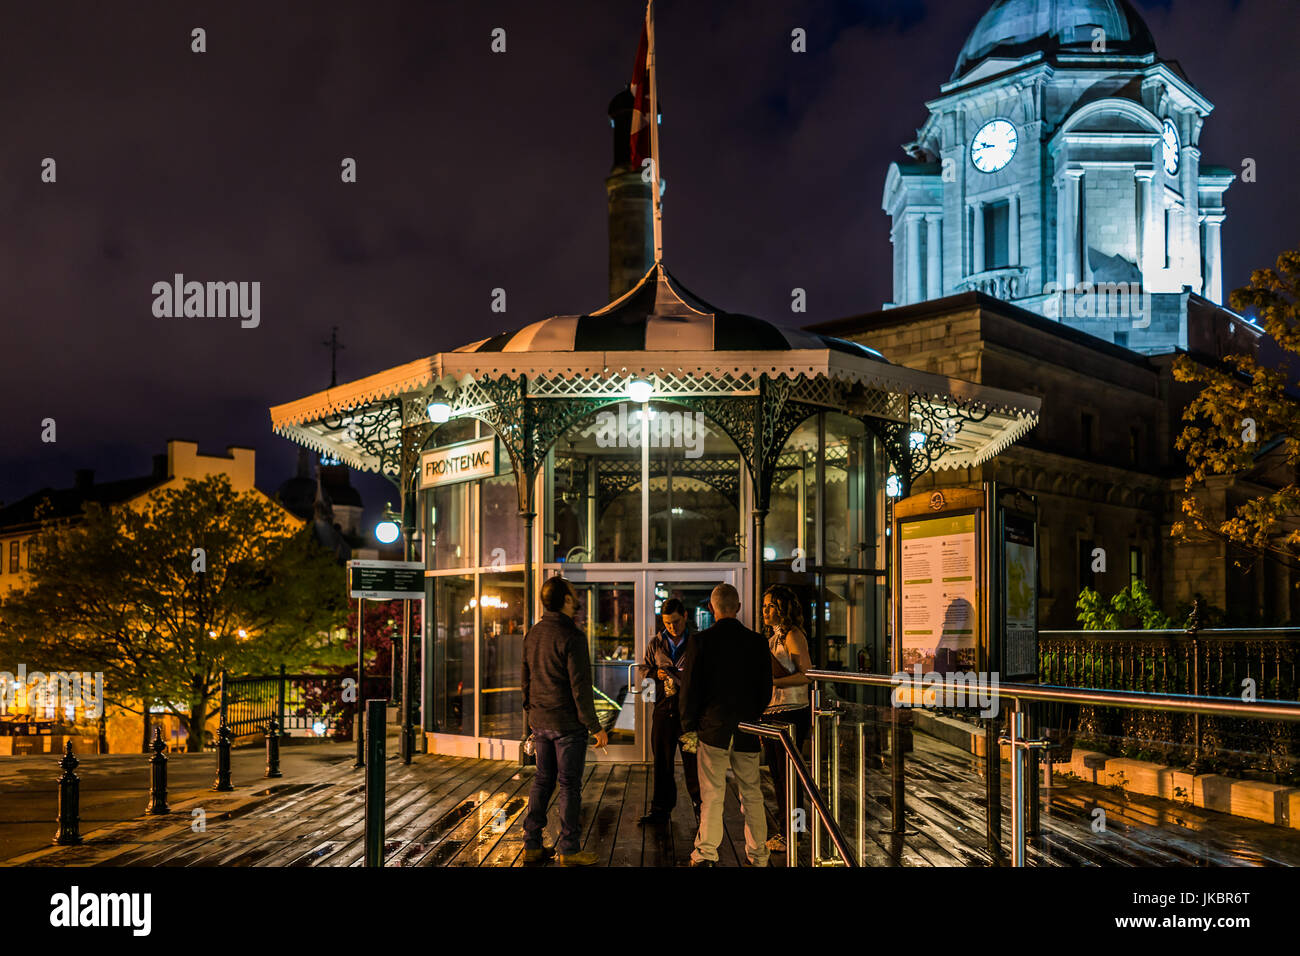 Quebec City, Canada - May 31, 2017: Old town view of people on dufferin terrace at night with illuminated Funiculaire building gazebo Stock Photo